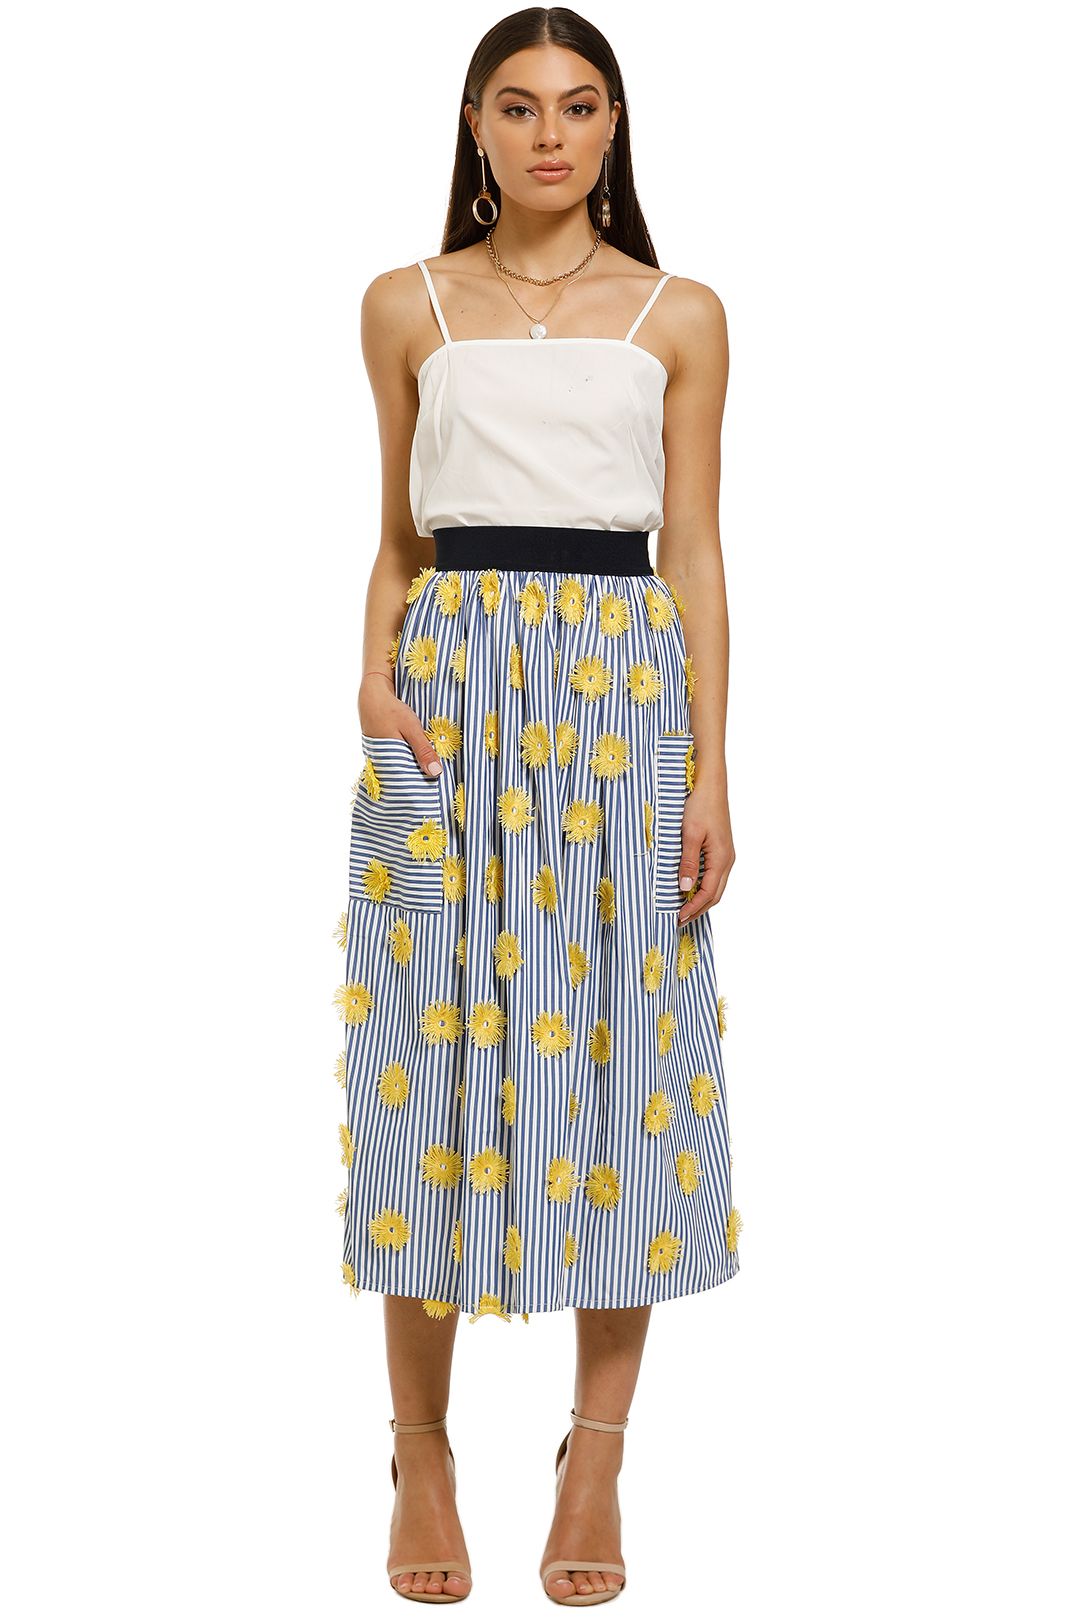 Curate-by-Trelise-Cooper-Full-Sun-Skirt-Stripes-Front